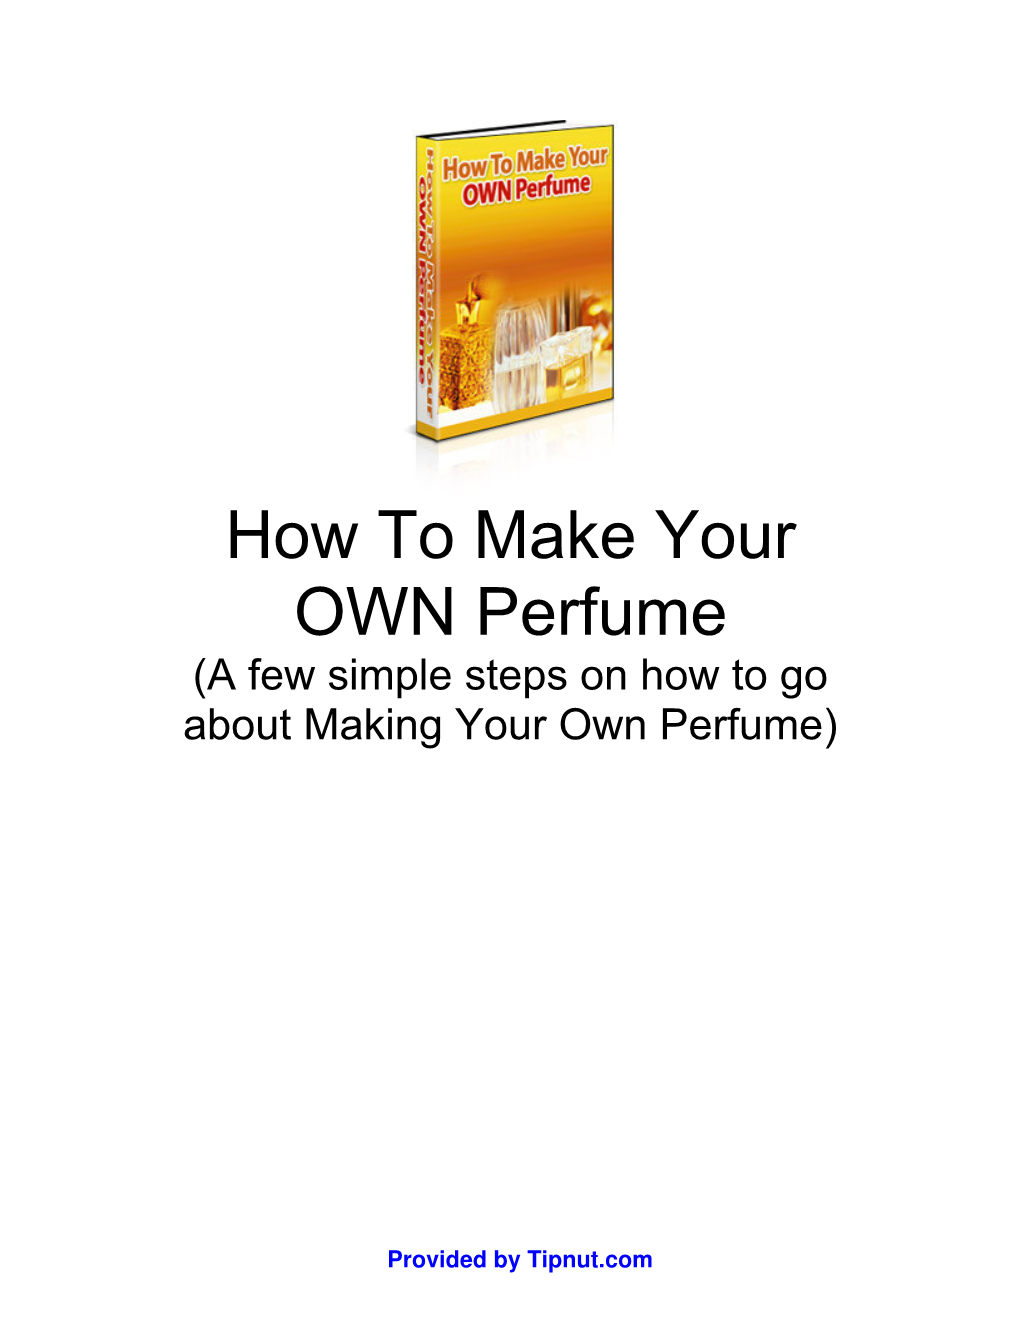 How to Make Your OWN Perfume (A Few Simple Steps on How to Go About Making Your Own Perfume)